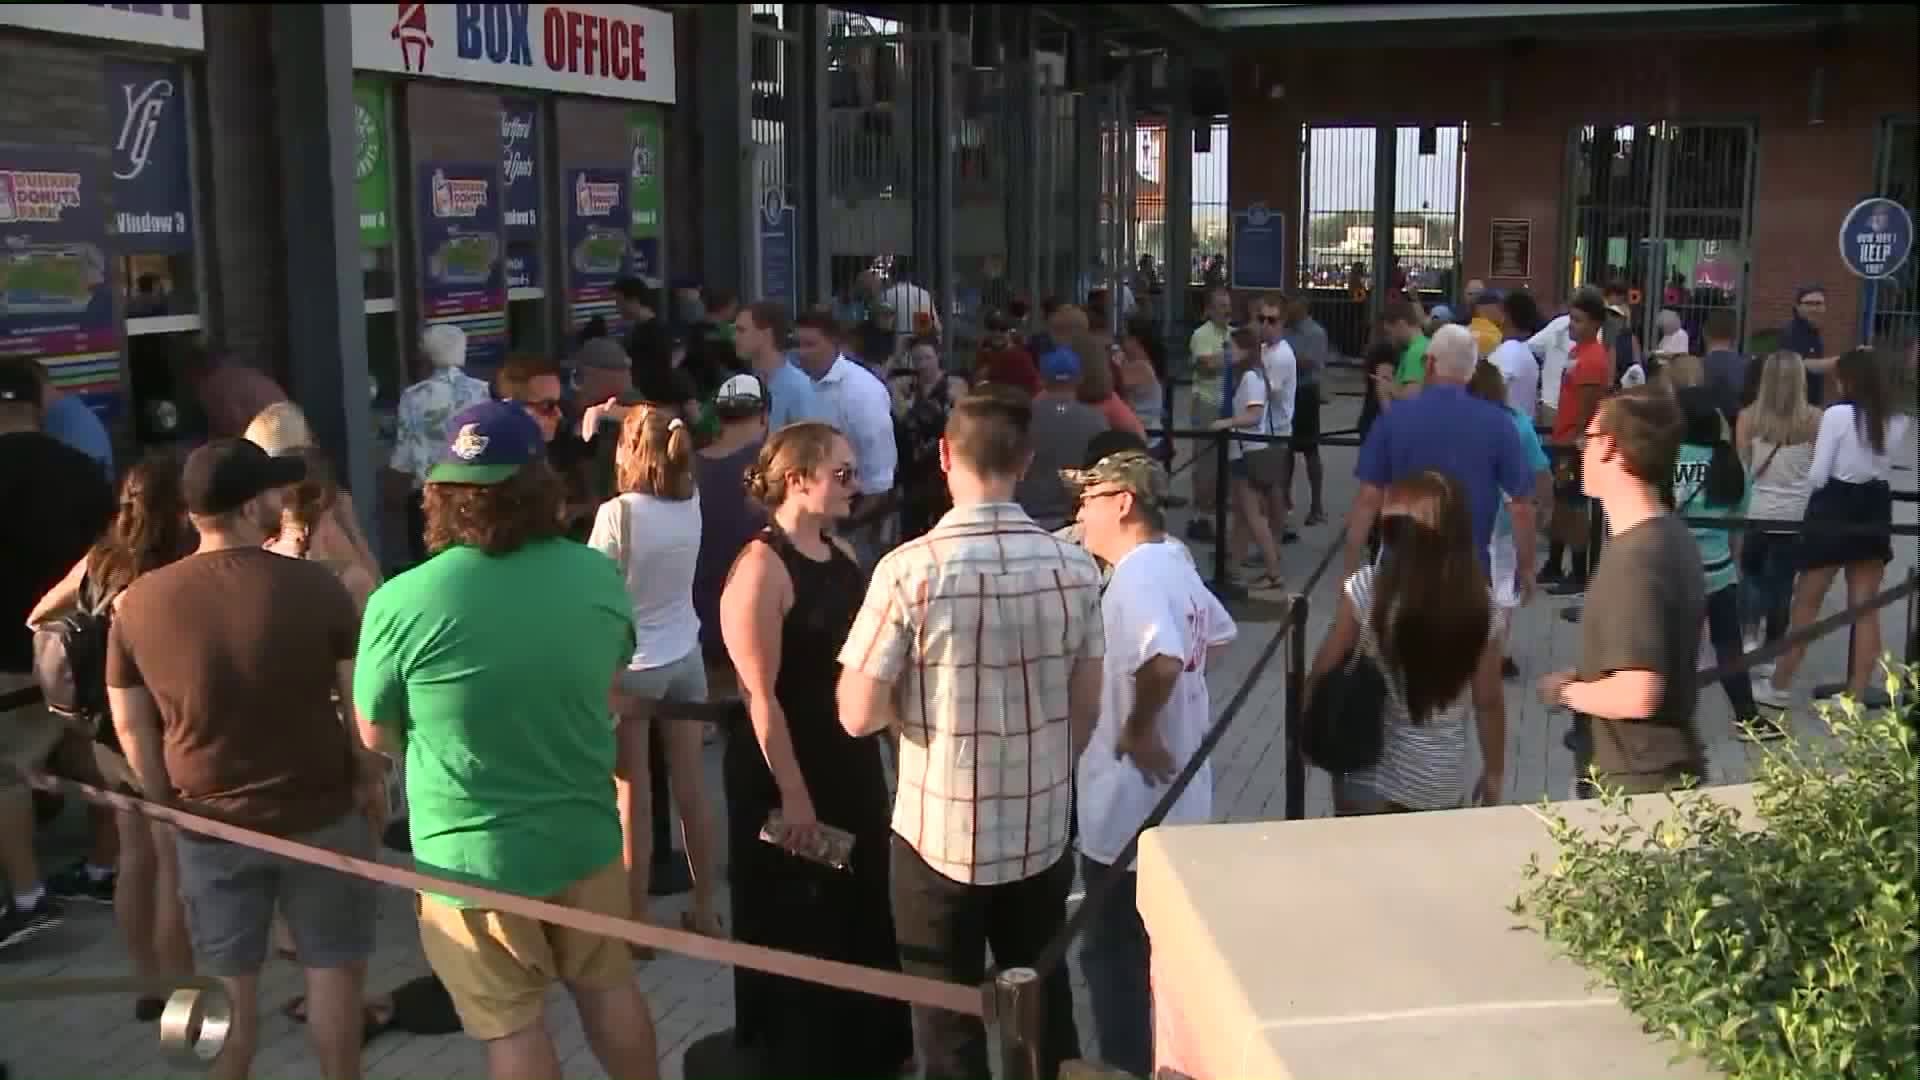 Crowds coming to Hartford for baseball